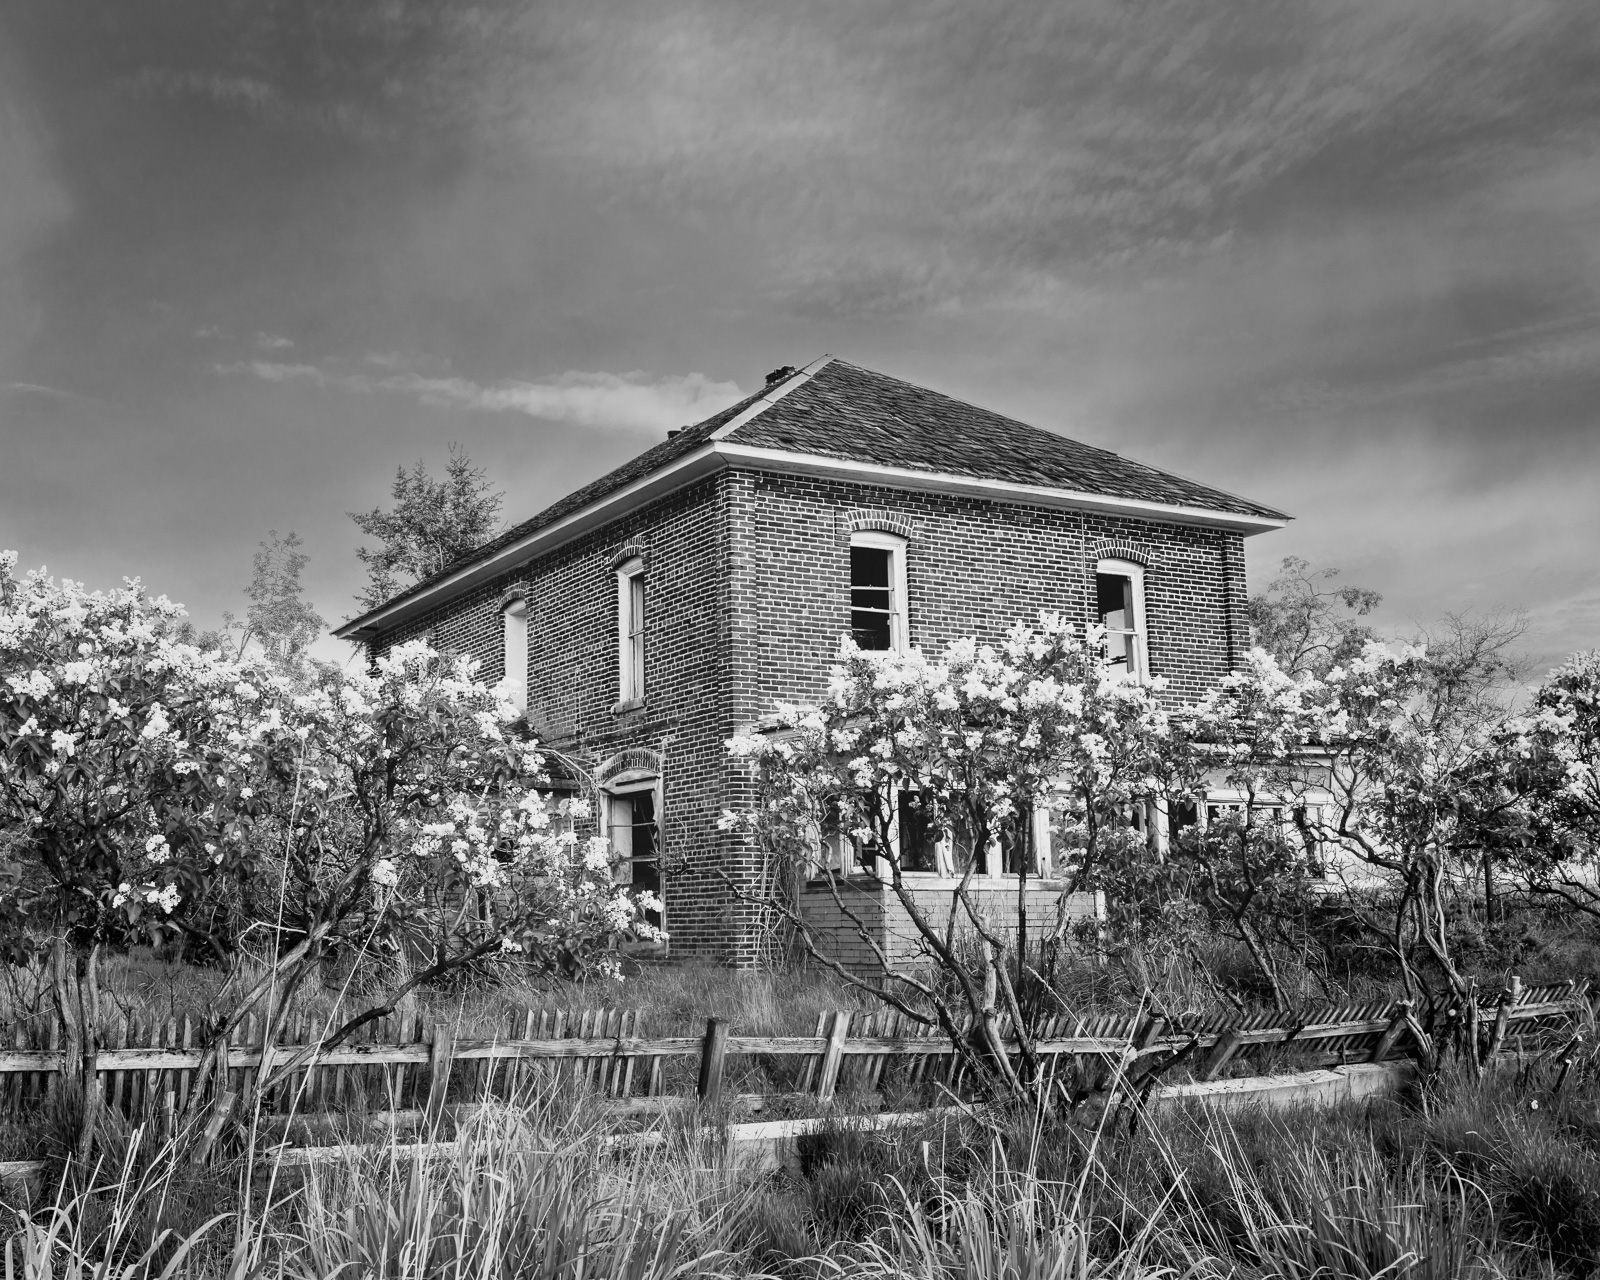 A black and white photograph of old abandoned brick house on D Road NW in rural Douglas County, Washington.